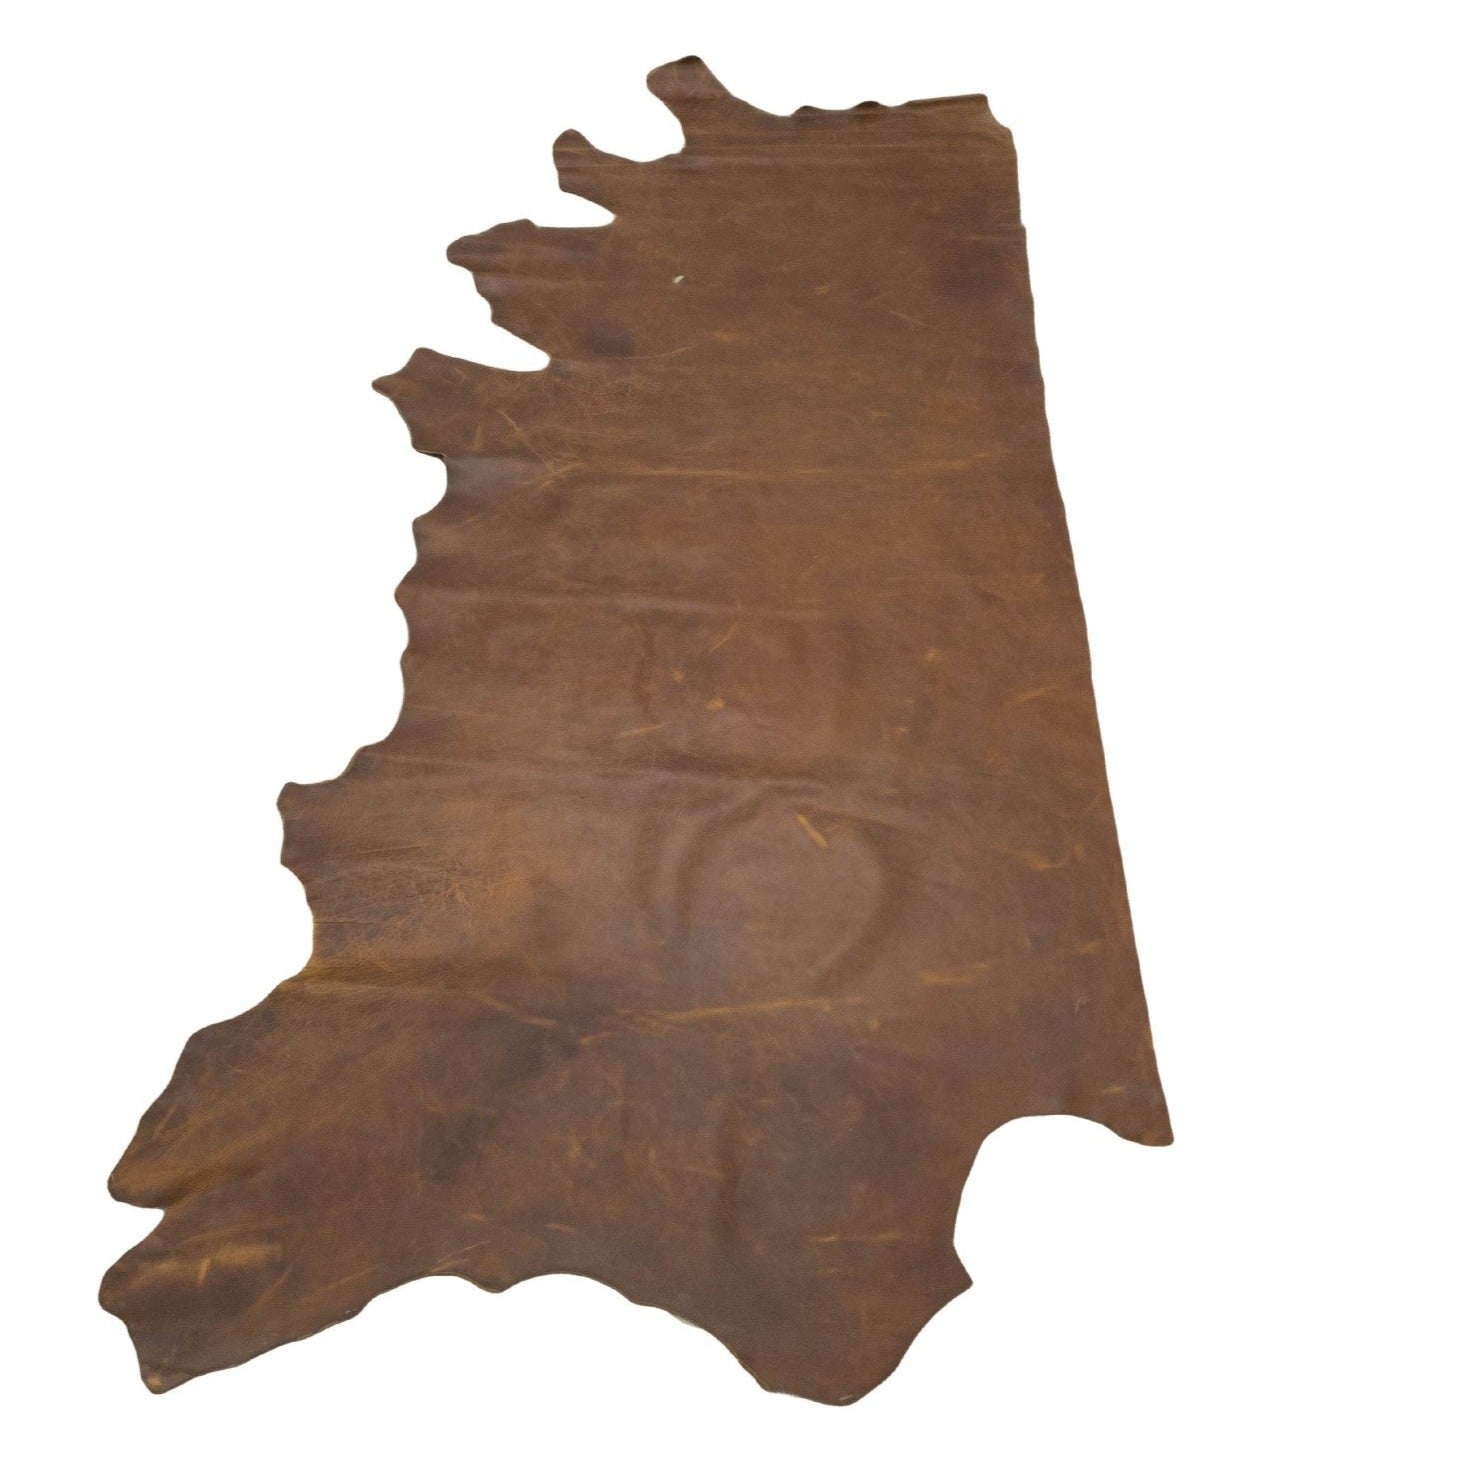 Tan, 4-5 oz, 18-29 Sq Ft, Chap Cow Side, 27-29 / Economy | The Leather Guy